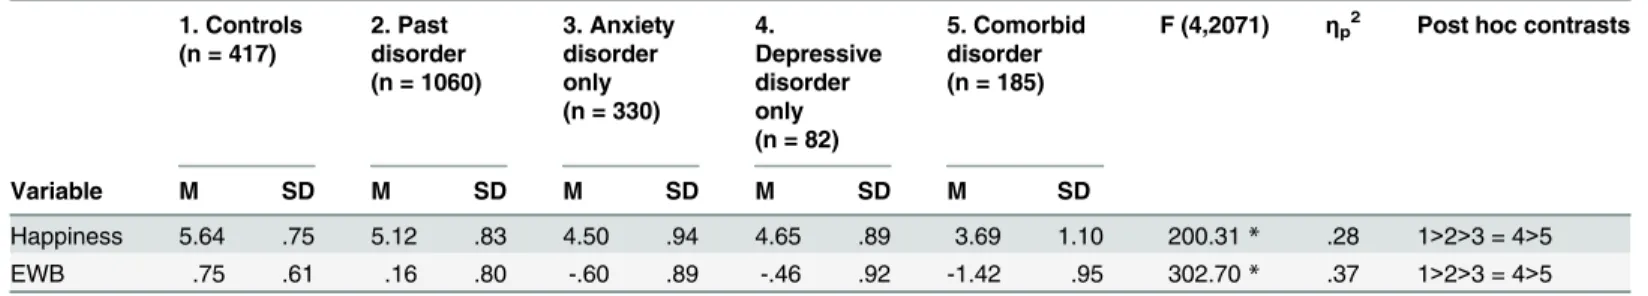 Table 1. Happiness and emotional well-being scores in groups differing in psychopathology (n = 2076) a 